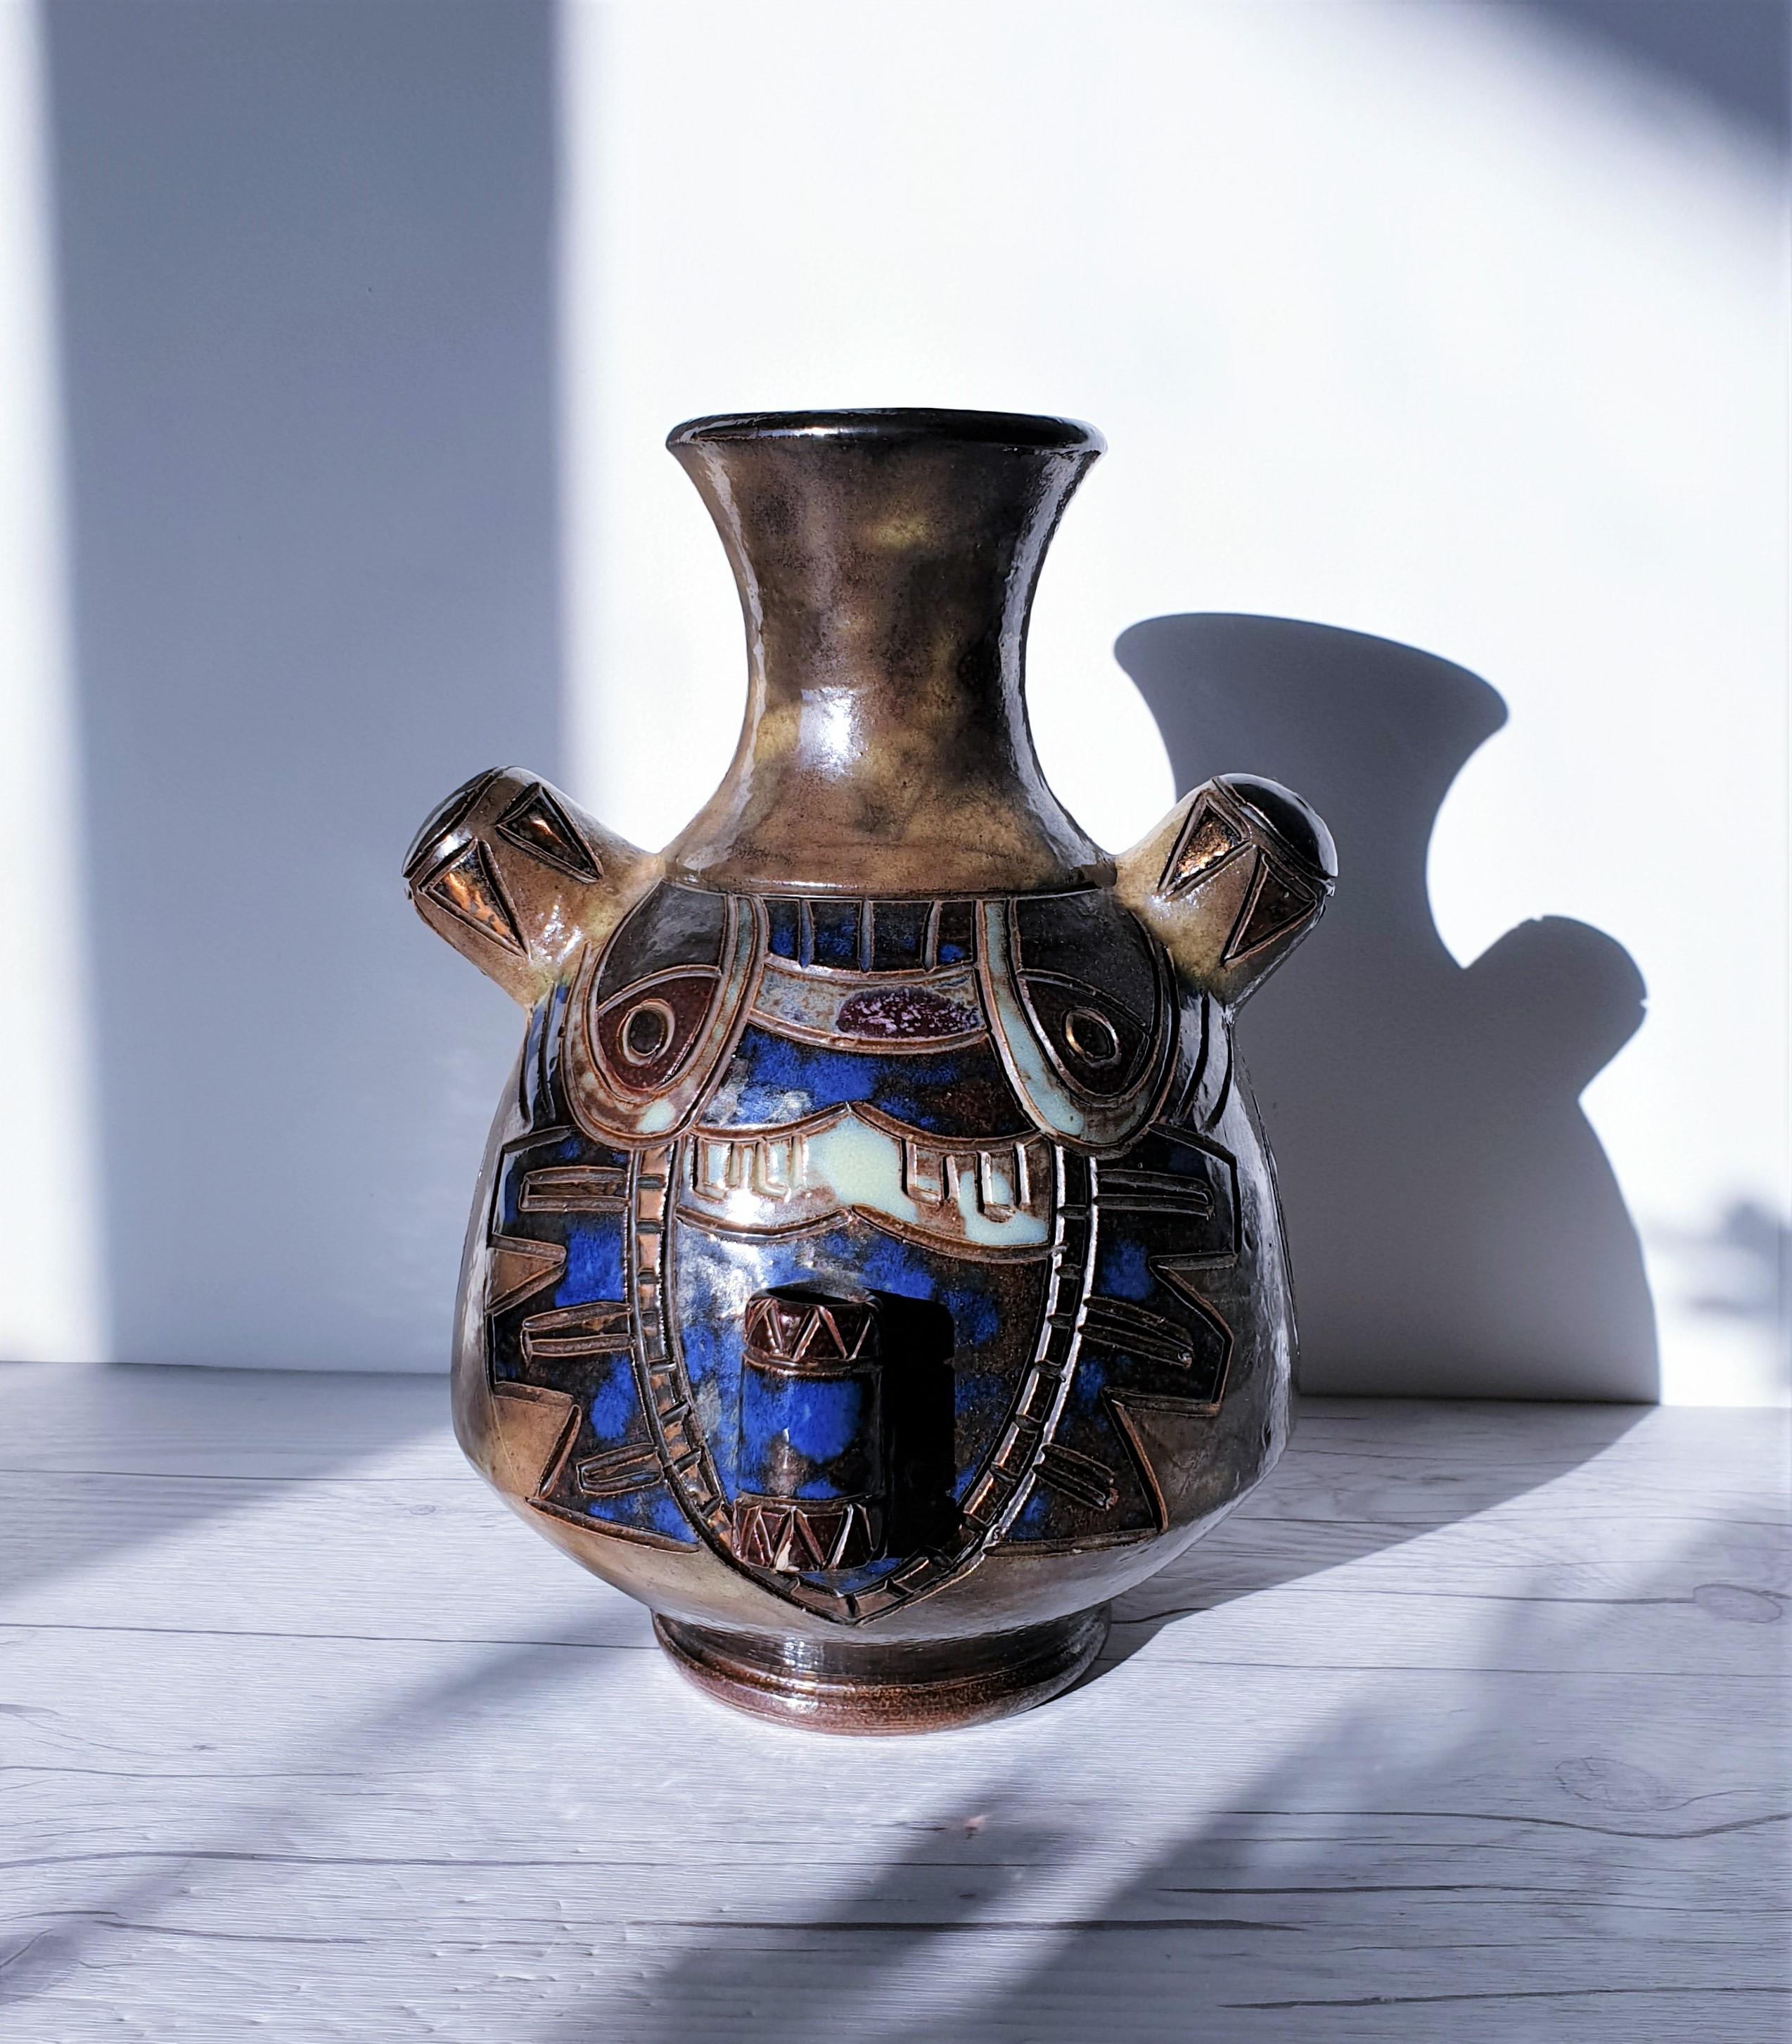 This stunning work of art by Roger Guerin hints at Northwest Pacific tribal symbolism with the abstract bear and jaybird décor. This hand-thrown vase is an outstanding example of his work, featuring unusual spouts and additions to its shape as well